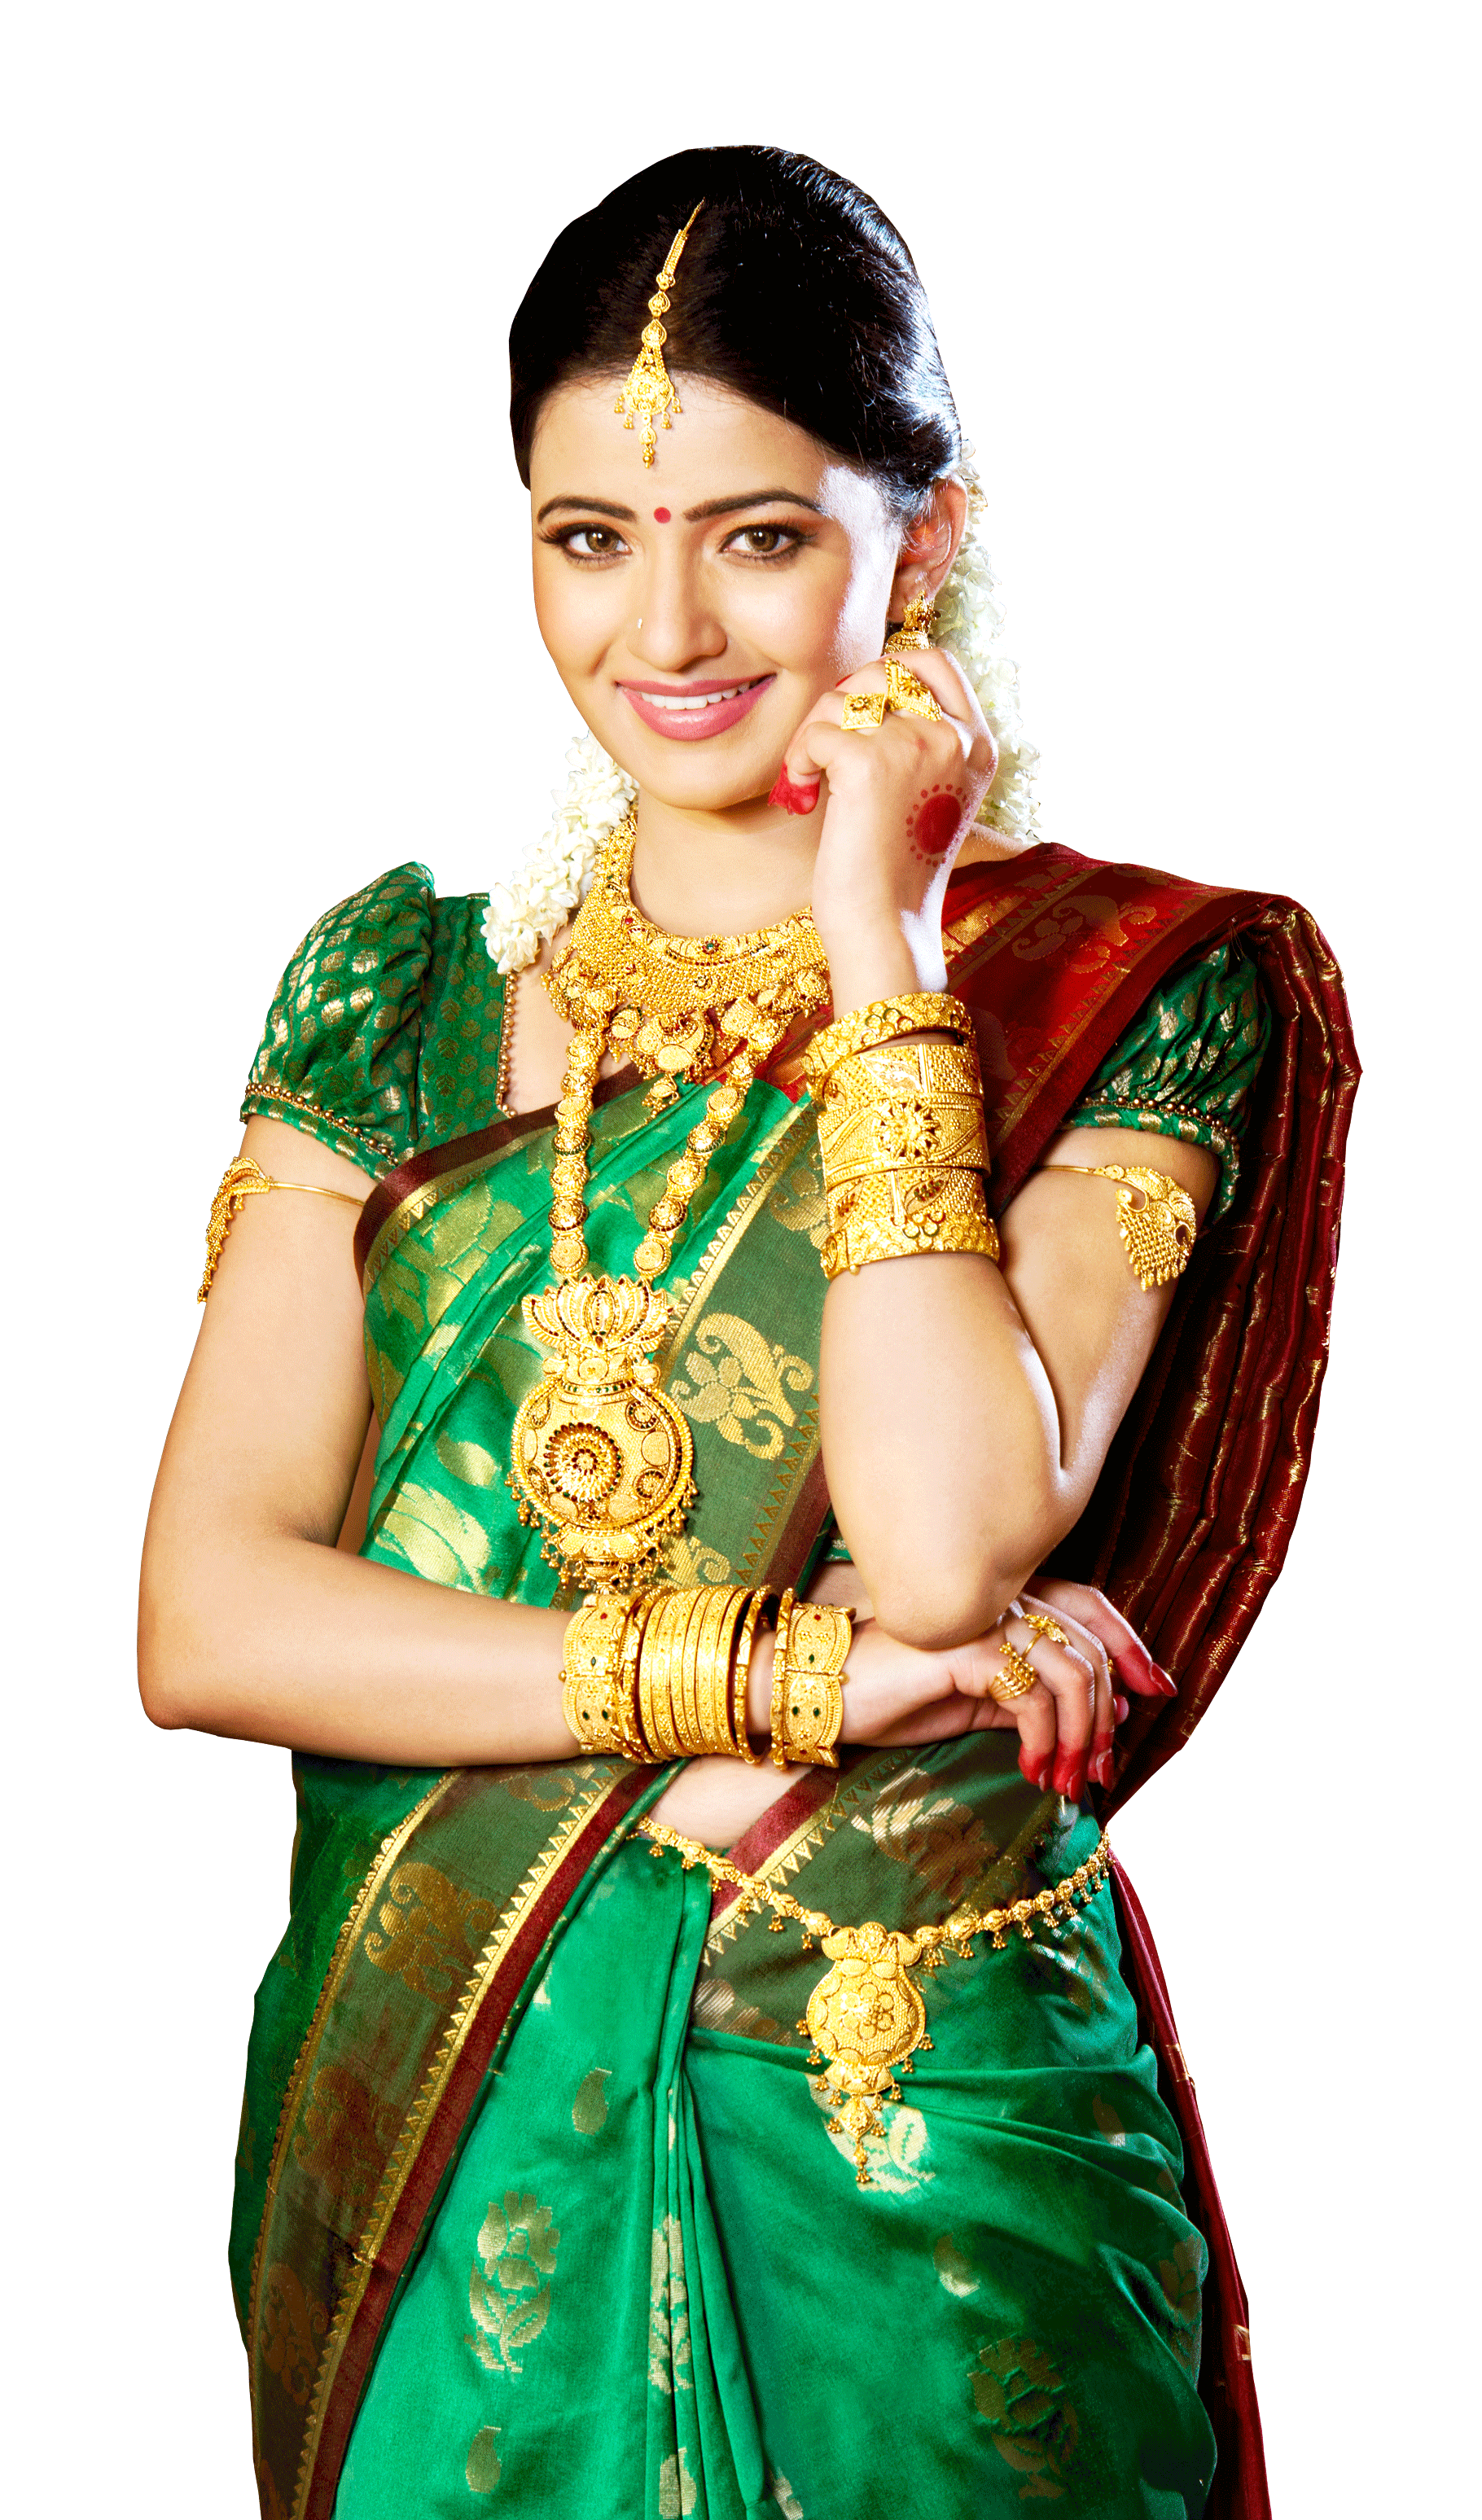 Download PNG image - Jewellery Model PNG Image 